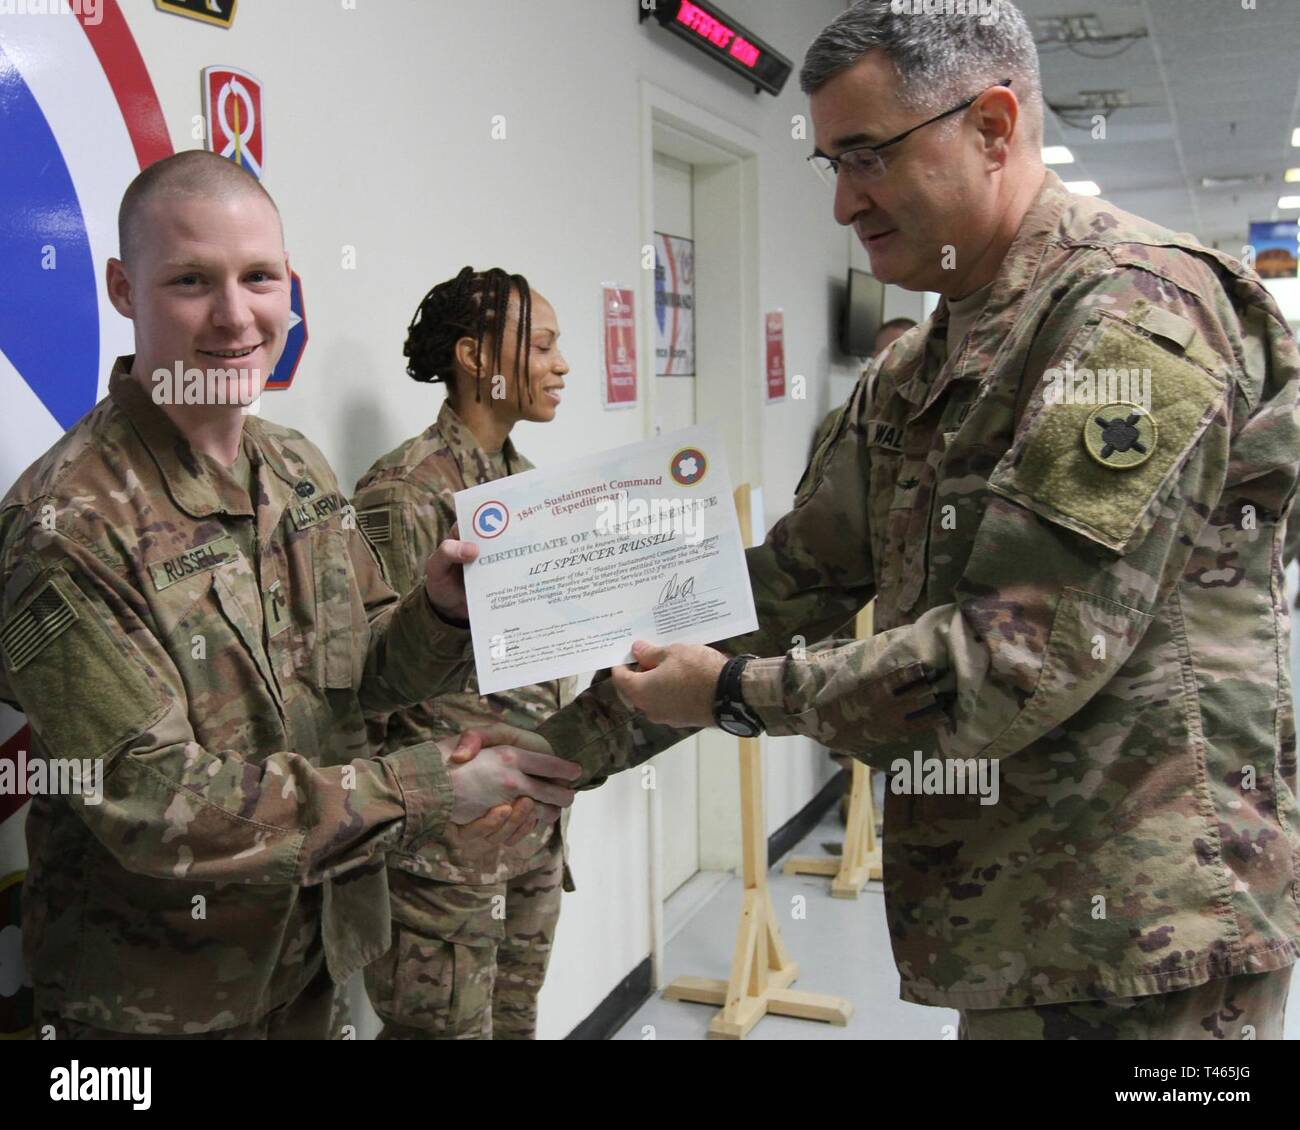 Brig. Gen. Clint E. Walker, commanding general of the 184th Sustainment Command, presents a certificate of wartime service to 1st Lt. Spencer Russell following the placement of the 184th ESC patch on his right shoulder at Camp Arifjan, Kuwait, Mar. 3, 2019. Stock Photo